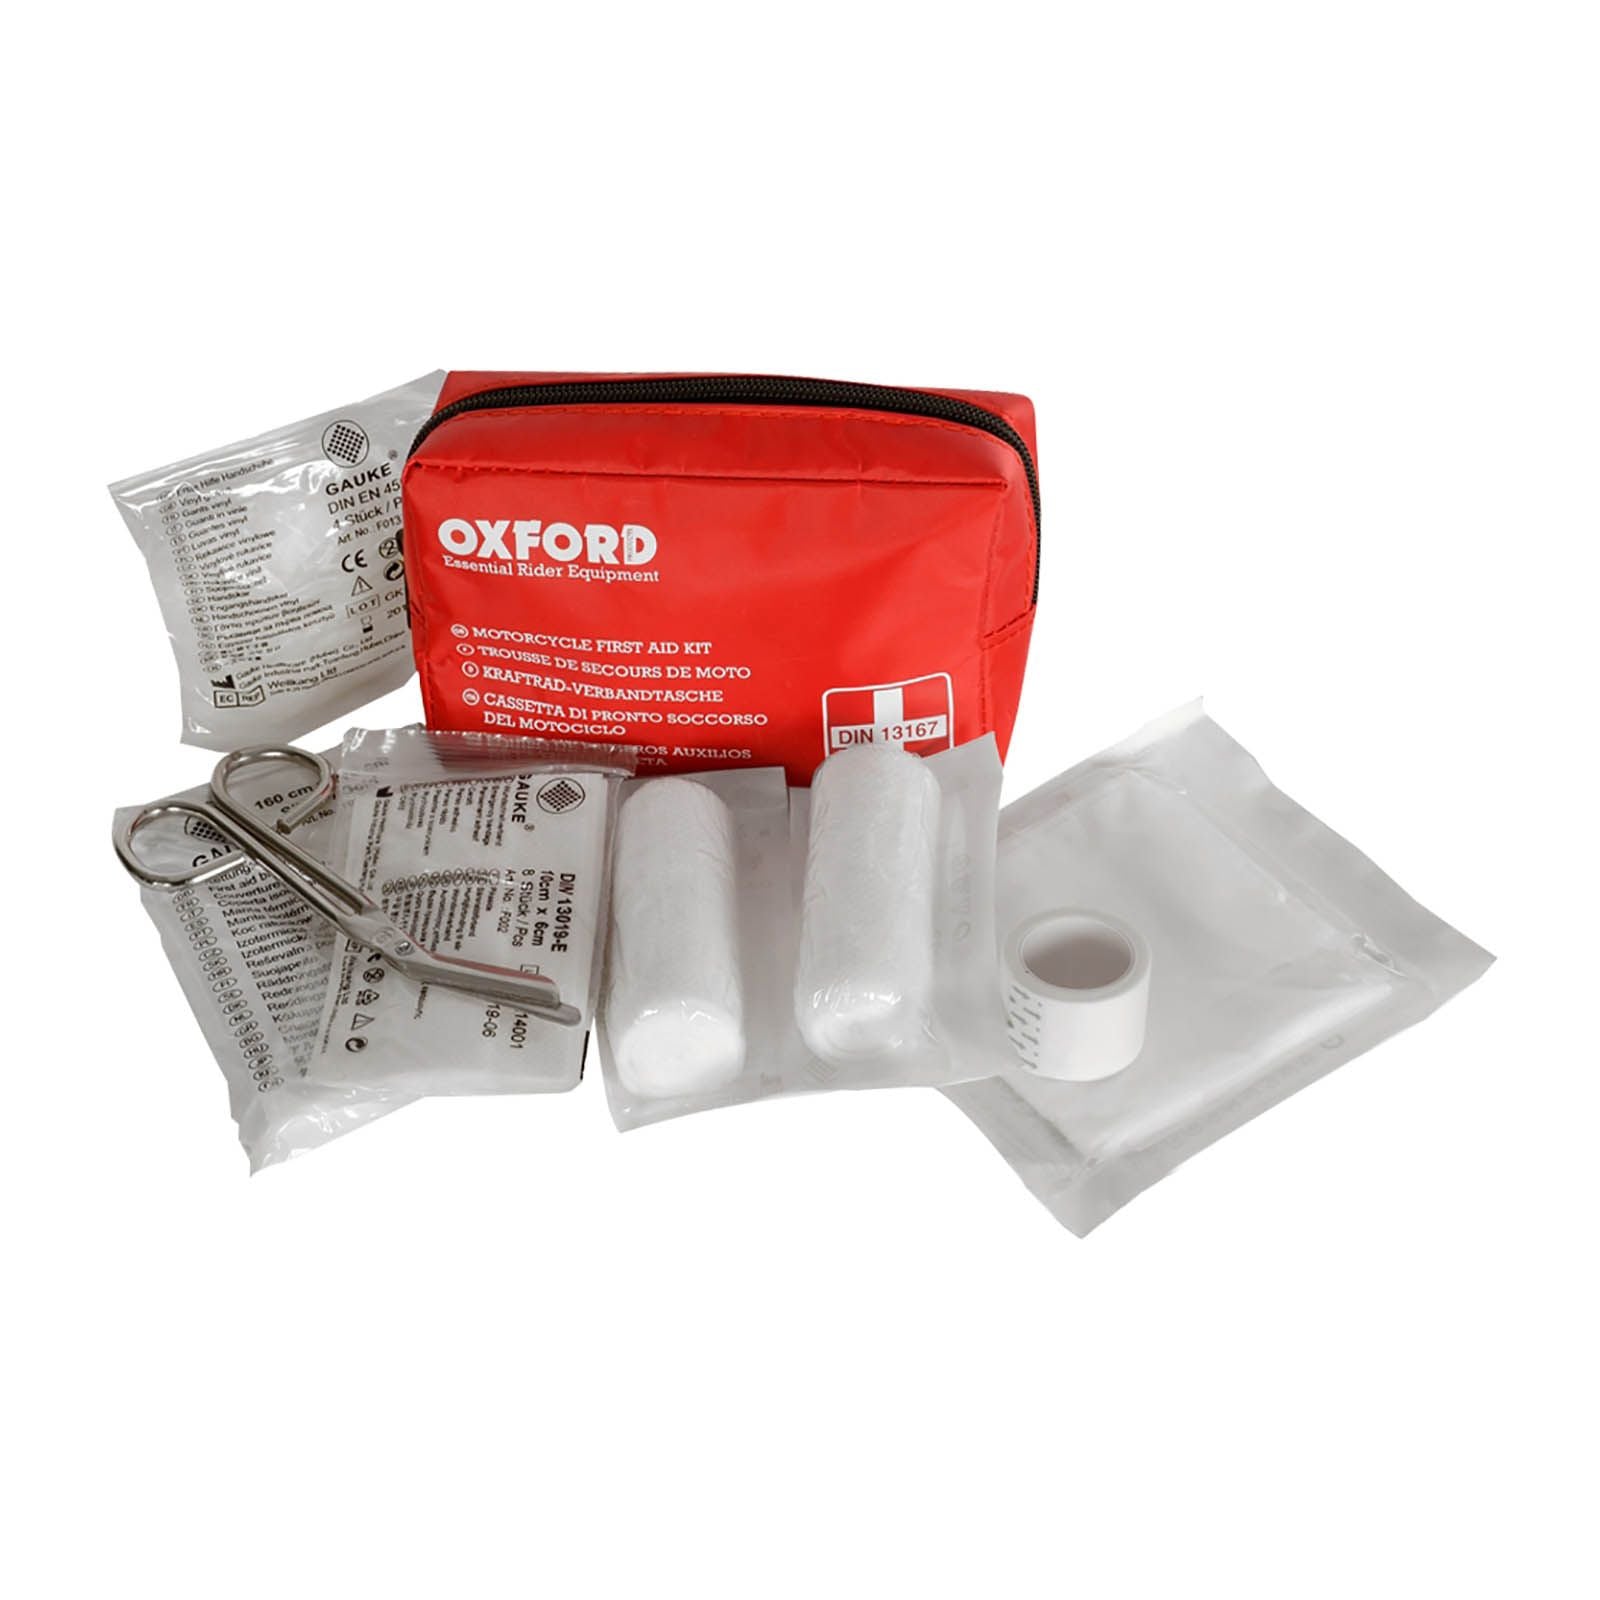 New OXFORD Underseat First Aid Kit #OXOX741